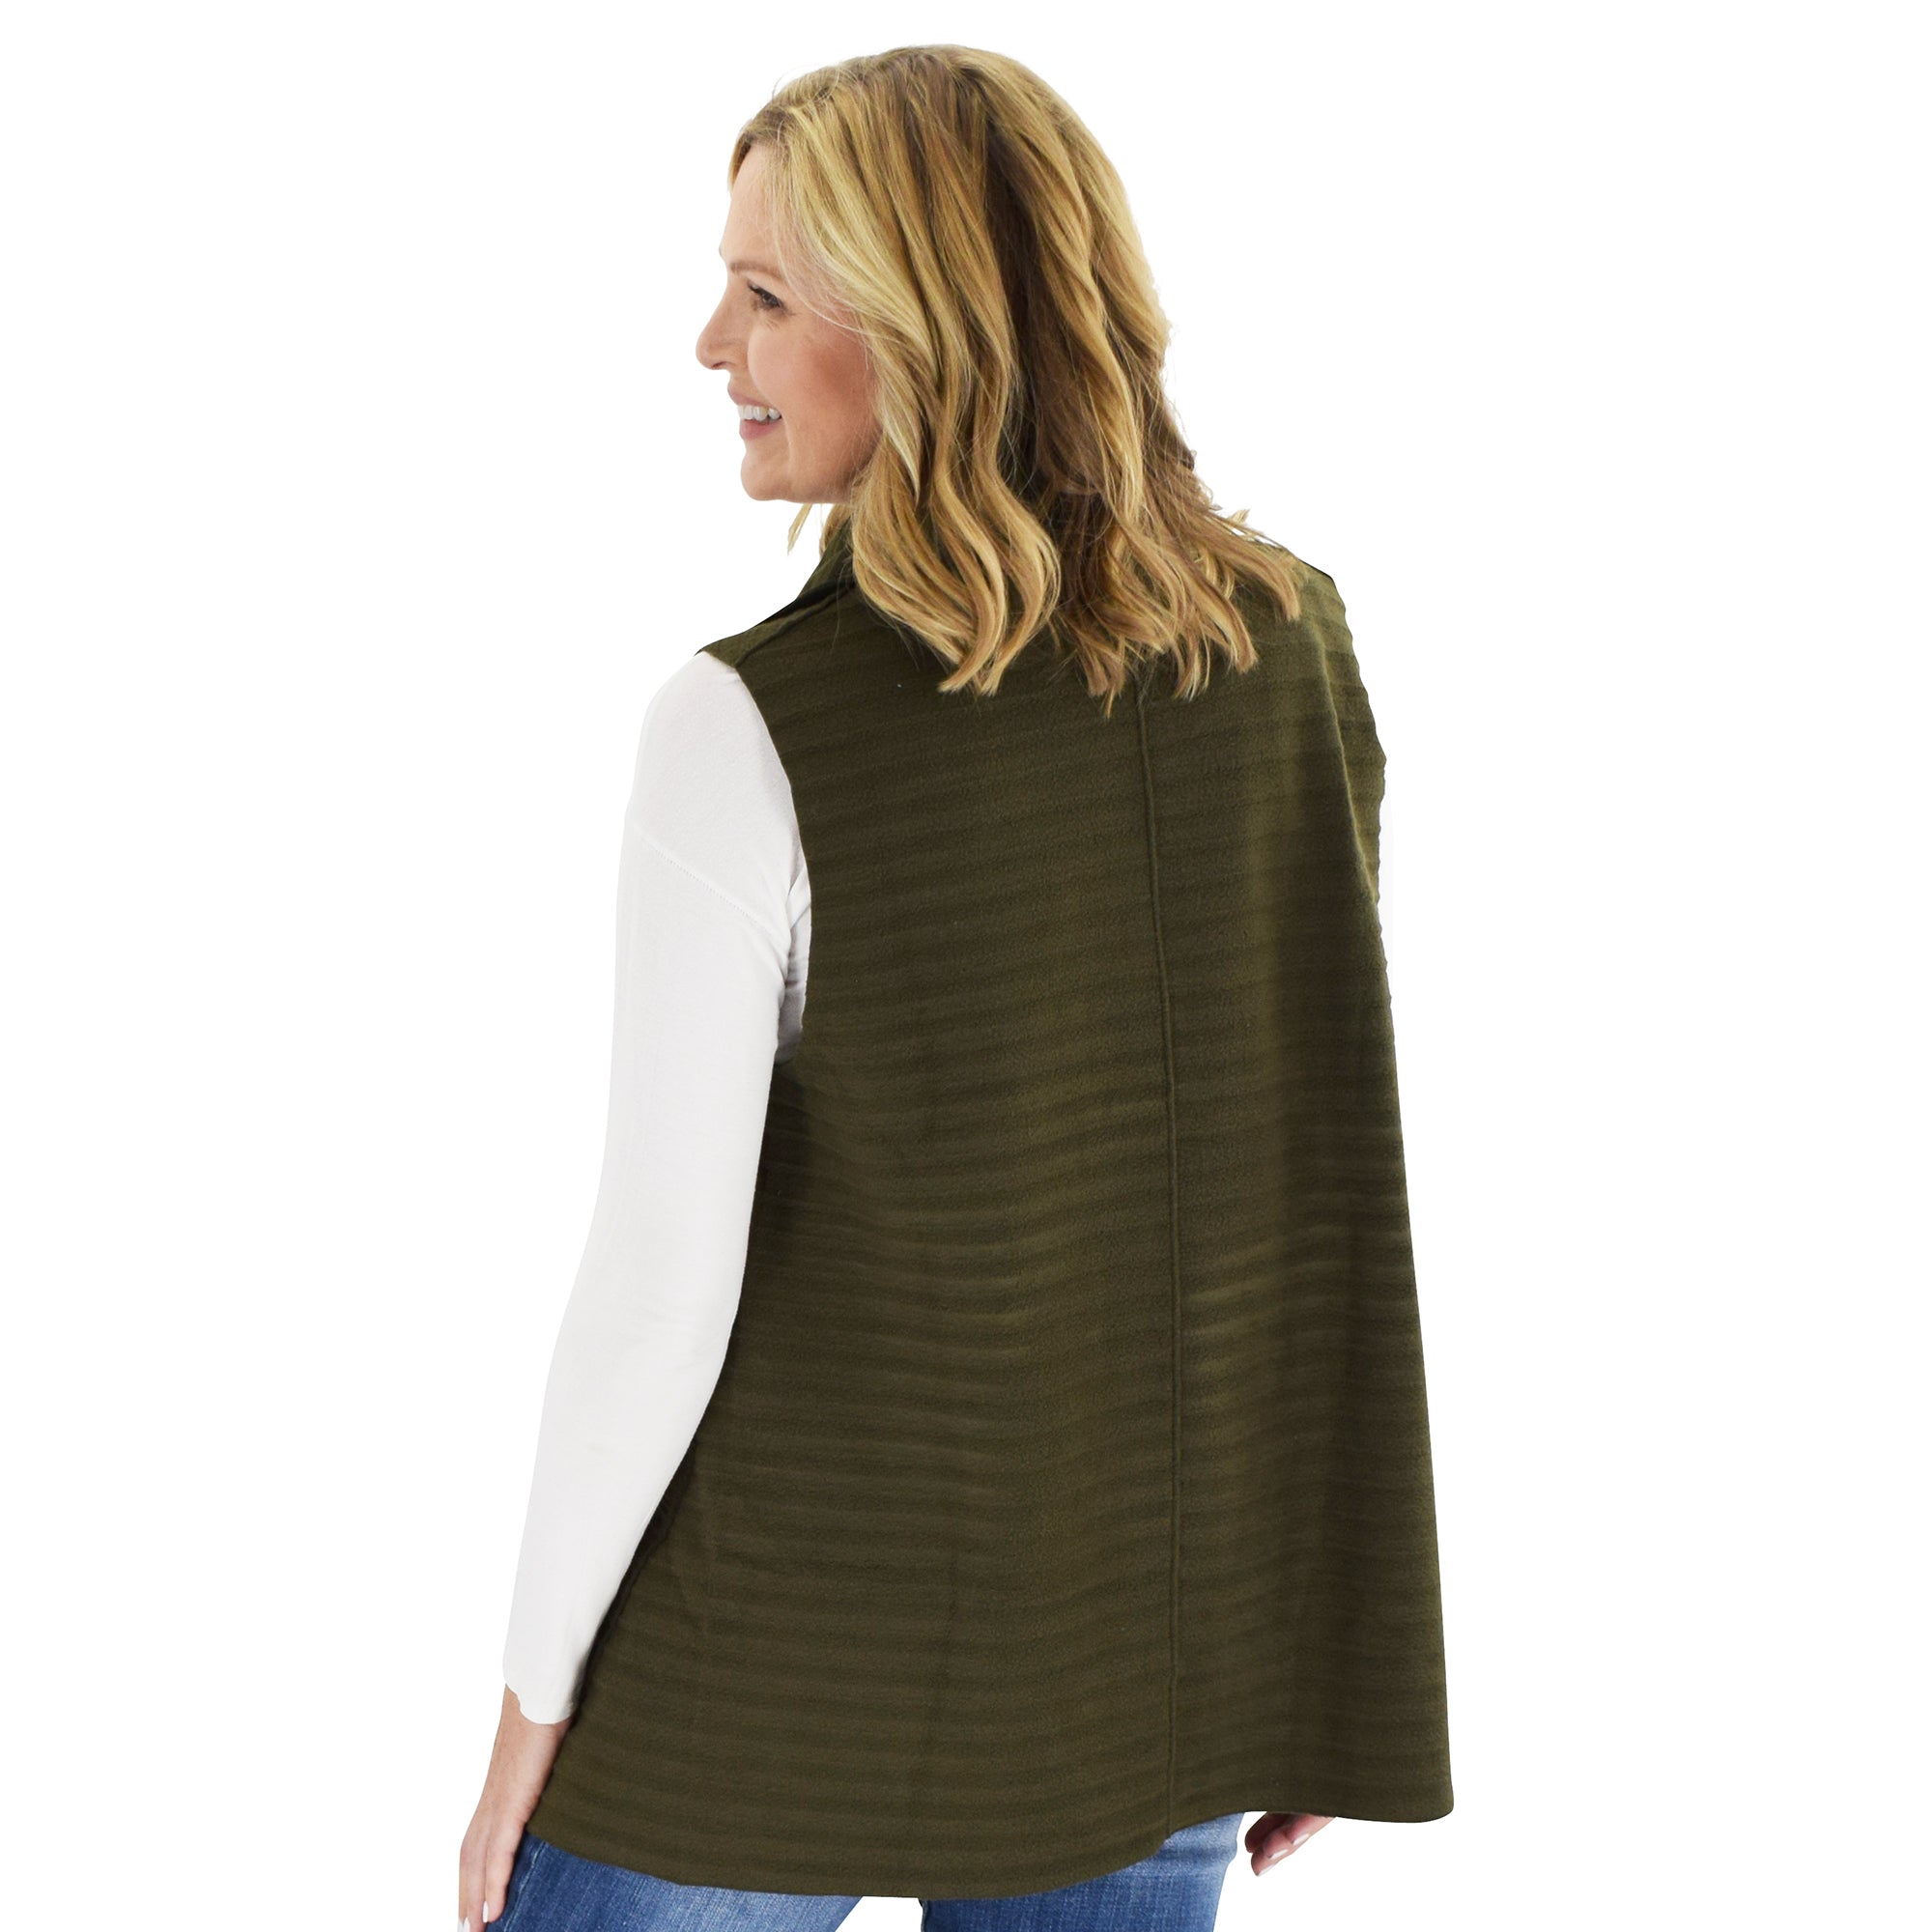 Le Moda Women's Sleeveless Pleated Open Front Fleece Vest Cardigan with Pockets at Linda Anderson. color_olive